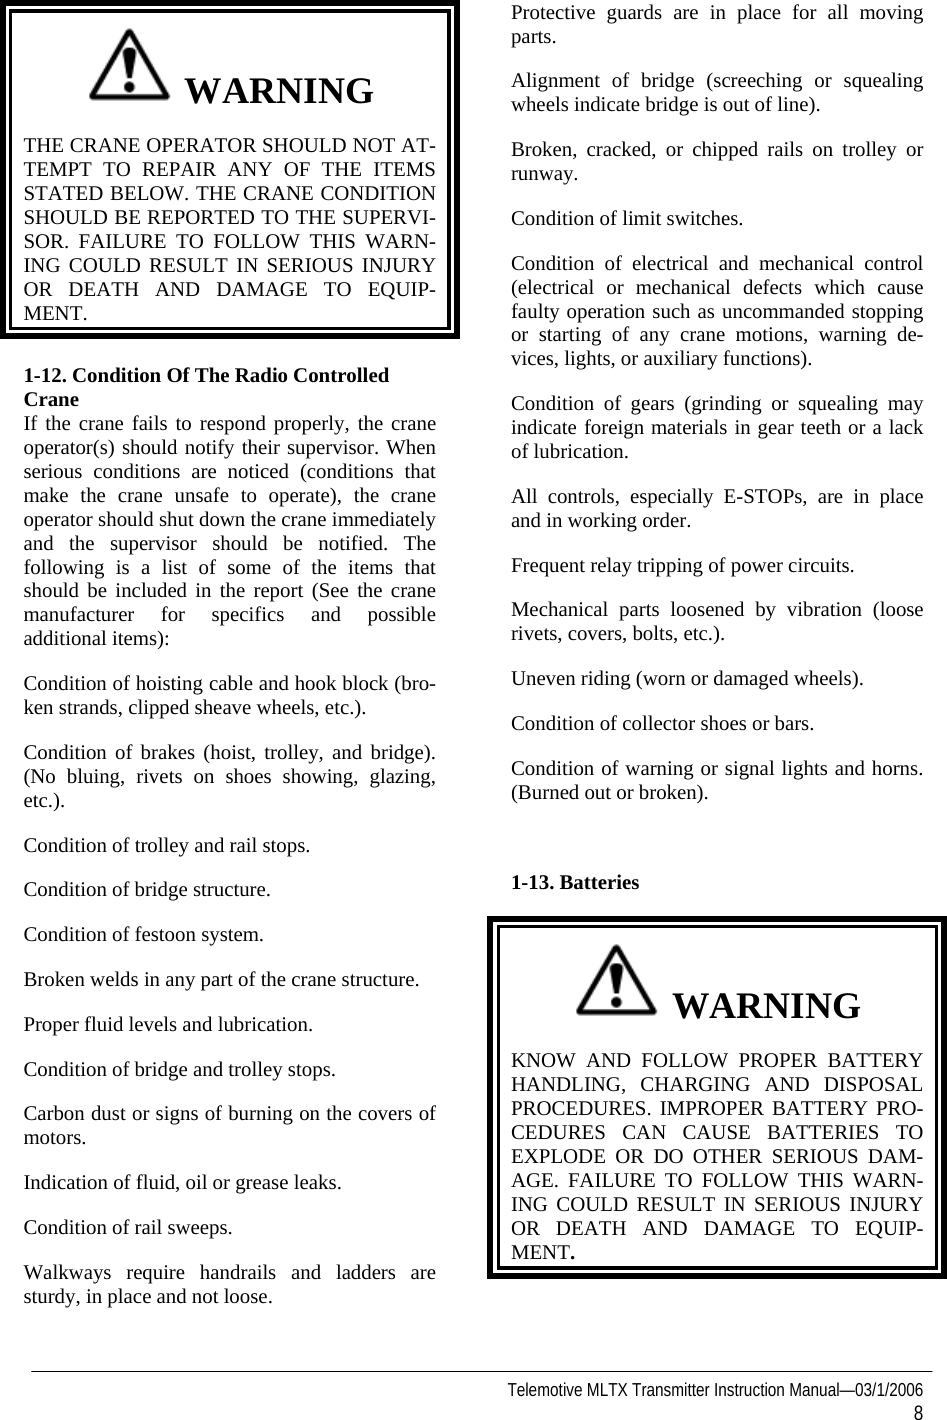   Telemotive MLTX Transmitter Instruction Manual—03/1/2006 8   WARNING THE CRANE OPERATOR SHOULD NOT AT-TEMPT TO REPAIR ANY OF THE ITEMS STATED BELOW. THE CRANE CONDITION SHOULD BE REPORTED TO THE SUPERVI-SOR. FAILURE TO FOLLOW THIS WARN-ING COULD RESULT IN SERIOUS INJURY OR DEATH AND DAMAGE TO EQUIP-MENT.  1-12. Condition Of The Radio Controlled Crane If the crane fails to respond properly, the crane operator(s) should notify their supervisor. When serious conditions are noticed (conditions that make the crane unsafe to operate), the crane operator should shut down the crane immediately and the supervisor should be notified. The following is a list of some of the items that should be included in the report (See the crane manufacturer for specifics and possible additional items): Condition of hoisting cable and hook block (bro-ken strands, clipped sheave wheels, etc.). Condition of brakes (hoist, trolley, and bridge). (No bluing, rivets on shoes showing, glazing, etc.). Condition of trolley and rail stops. Condition of bridge structure. Condition of festoon system. Broken welds in any part of the crane structure. Proper fluid levels and lubrication. Condition of bridge and trolley stops. Carbon dust or signs of burning on the covers of motors. Indication of fluid, oil or grease leaks. Condition of rail sweeps. Walkways require handrails and ladders are sturdy, in place and not loose. Protective guards are in place for all moving parts. Alignment of bridge (screeching or squealing wheels indicate bridge is out of line). Broken, cracked, or chipped rails on trolley or runway. Condition of limit switches. Condition of electrical and mechanical control (electrical or mechanical defects which cause faulty operation such as uncommanded stopping or starting of any crane motions, warning de-vices, lights, or auxiliary functions). Condition of gears (grinding or squealing may indicate foreign materials in gear teeth or a lack of lubrication. All controls, especially E-STOPs, are in place and in working order. Frequent relay tripping of power circuits. Mechanical parts loosened by vibration (loose rivets, covers, bolts, etc.). Uneven riding (worn or damaged wheels). Condition of collector shoes or bars. Condition of warning or signal lights and horns. (Burned out or broken).  1-13. Batteries    WARNING KNOW AND FOLLOW PROPER BATTERY HANDLING, CHARGING AND DISPOSAL PROCEDURES. IMPROPER BATTERY PRO-CEDURES CAN CAUSE BATTERIES TO EXPLODE OR DO OTHER SERIOUS DAM-AGE. FAILURE TO FOLLOW THIS WARN-ING COULD RESULT IN SERIOUS INJURY OR DEATH AND DAMAGE TO EQUIP-MENT.   